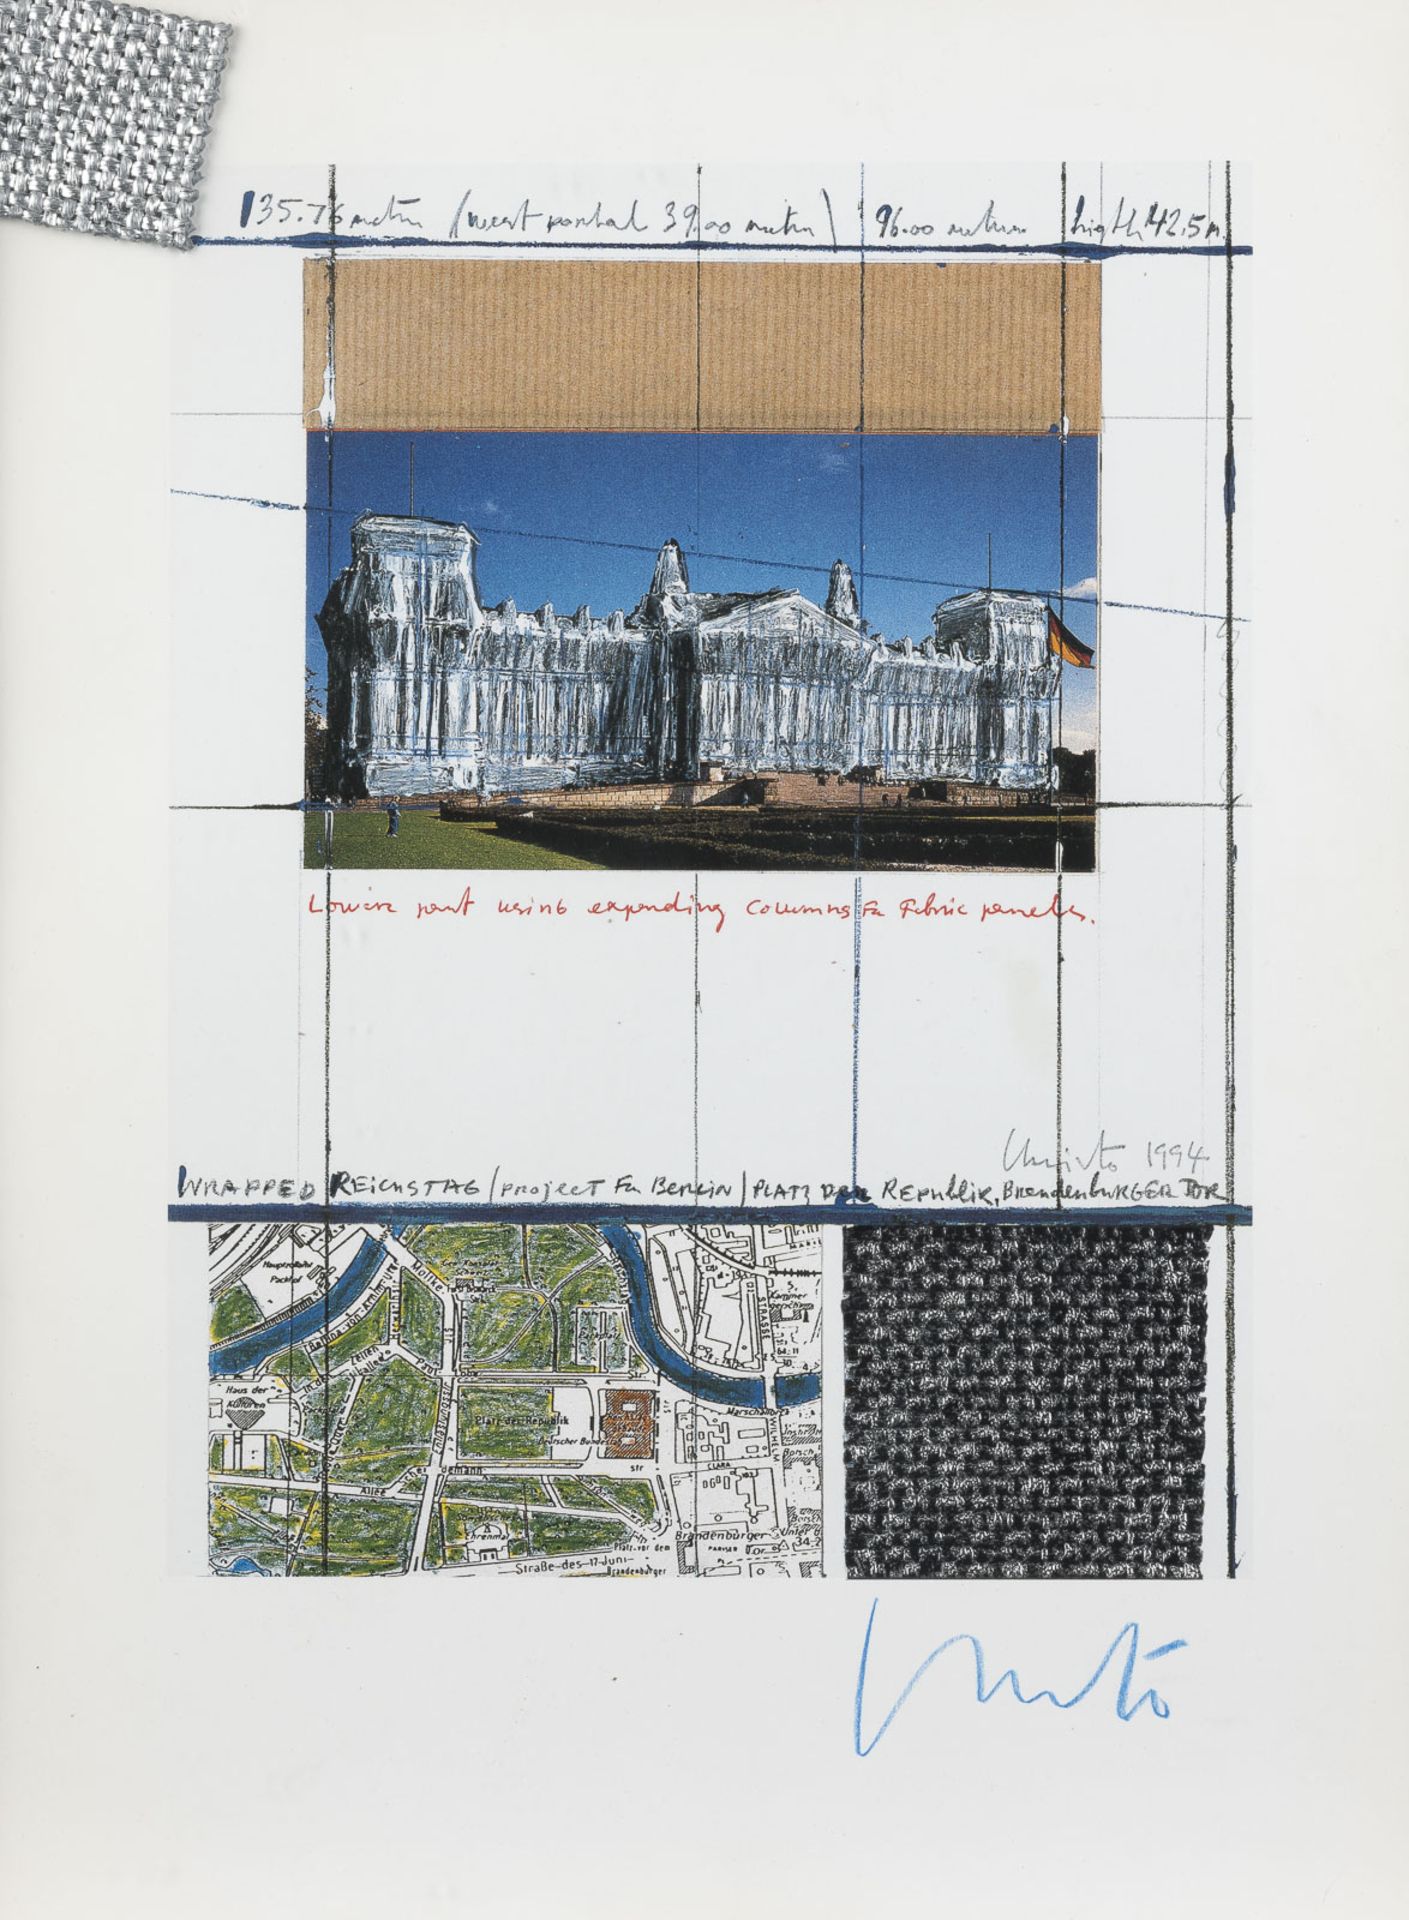 'WRAPPED REICHSTAG, PROJECT FOR BERLIN' (1994) MIT STOFFPROBE